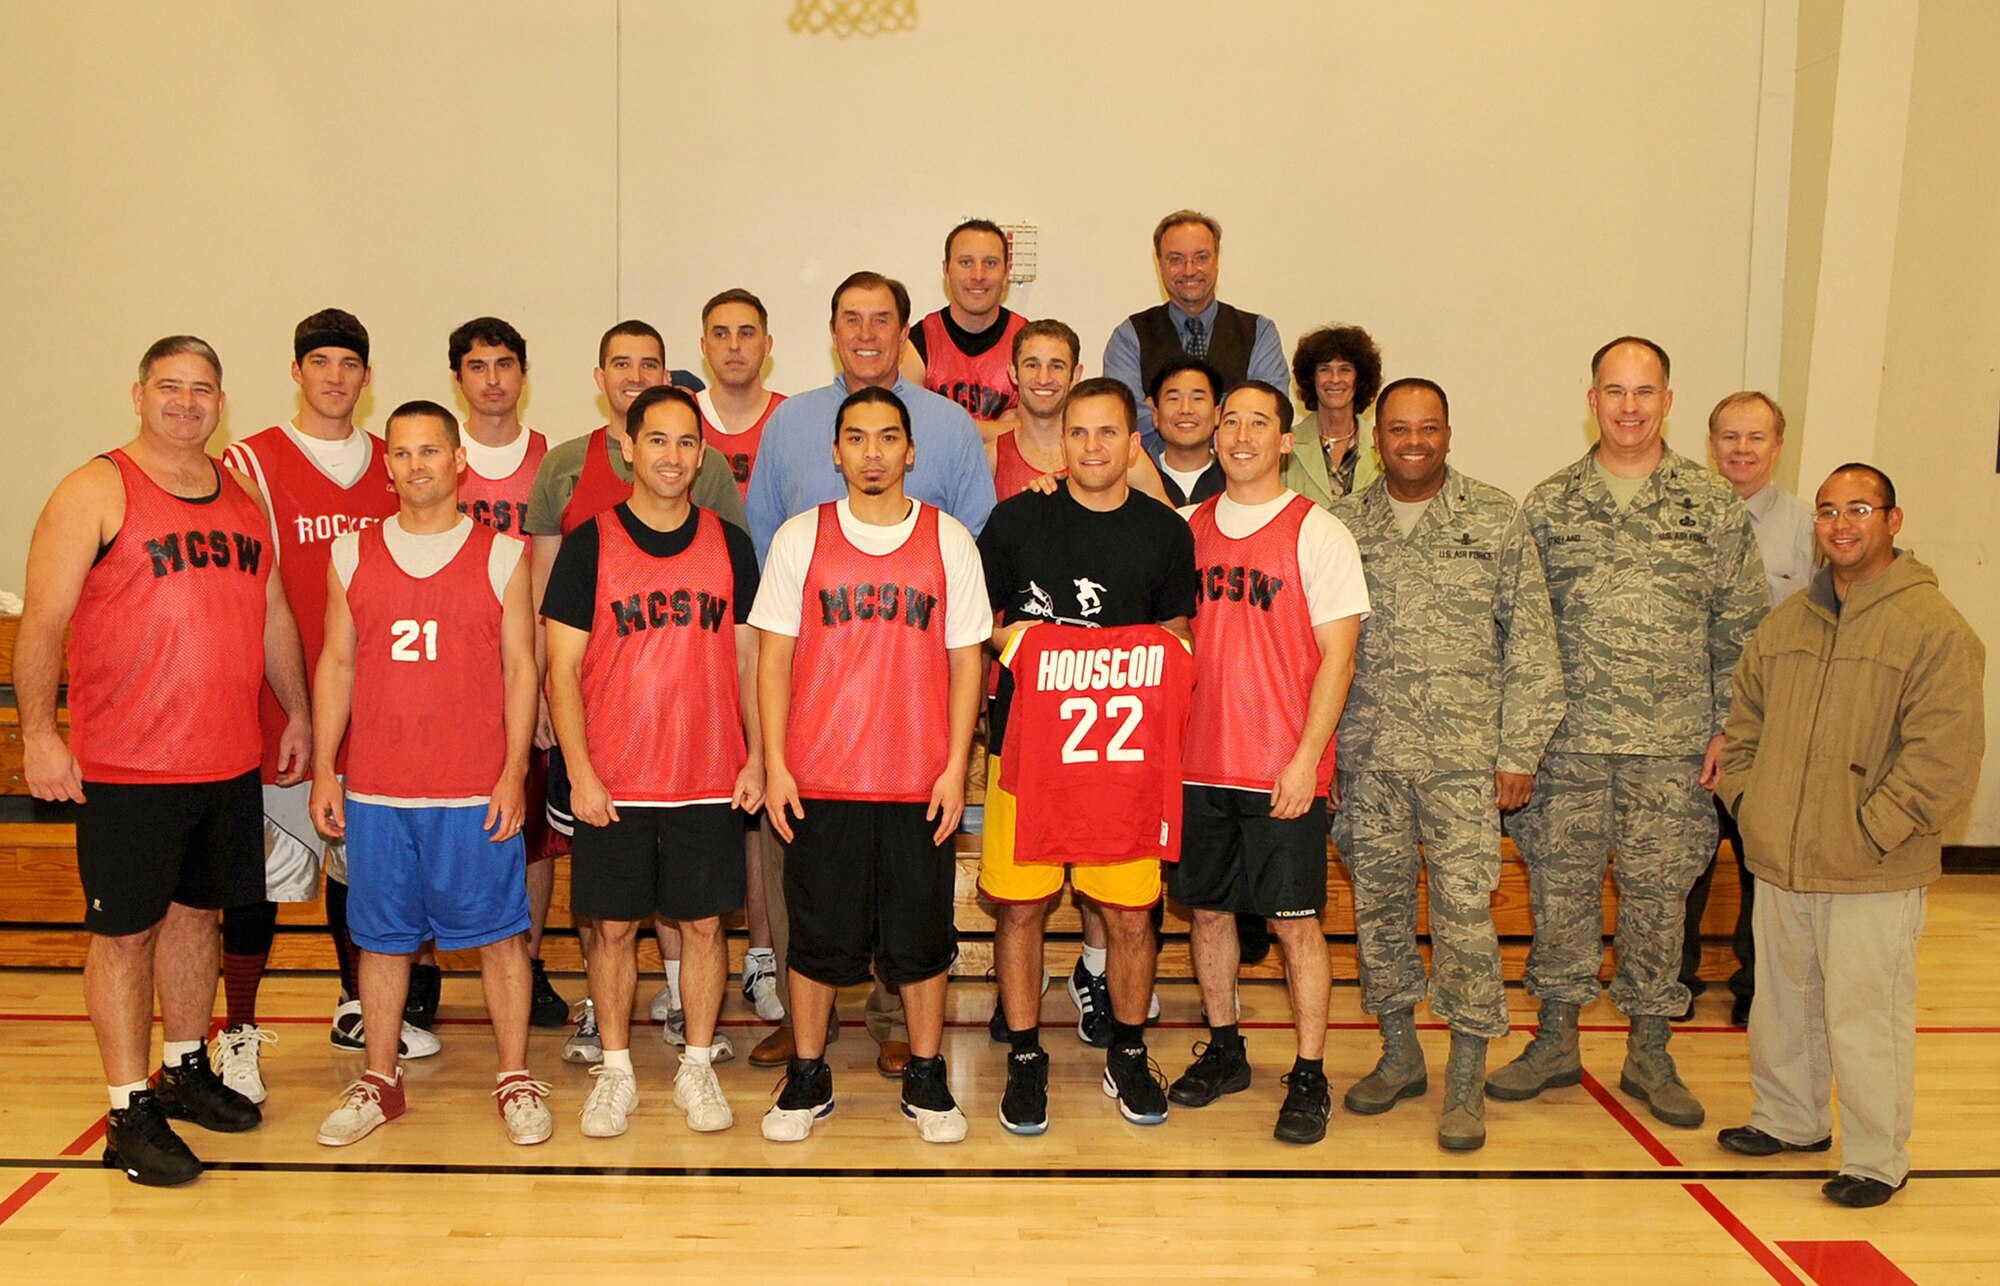 Rudy Tomjanovich (middle in blue sweater), former NBA champion, gold medal head coach of the Houston Rockets and the Men’s Basketball team for the 2000 Olympics, and former head coach of the Los Angeles Lakers, poses with team players of the Military Satellite Communications Systems Wing before their intramural basketball game, Feb. 12. Coach Tomjanovich visited the Space and Missile Center to support the troops as an invitation from his personal friend, Tom Meseroll, MILSATCOM Chief Engineer’s Office senior contractor. Brig. Gen. Samuel Greaves (front row, third from right), MILSATCOM Space Wing commander, attended the game. (Photo by Stephen Schester) (released) 